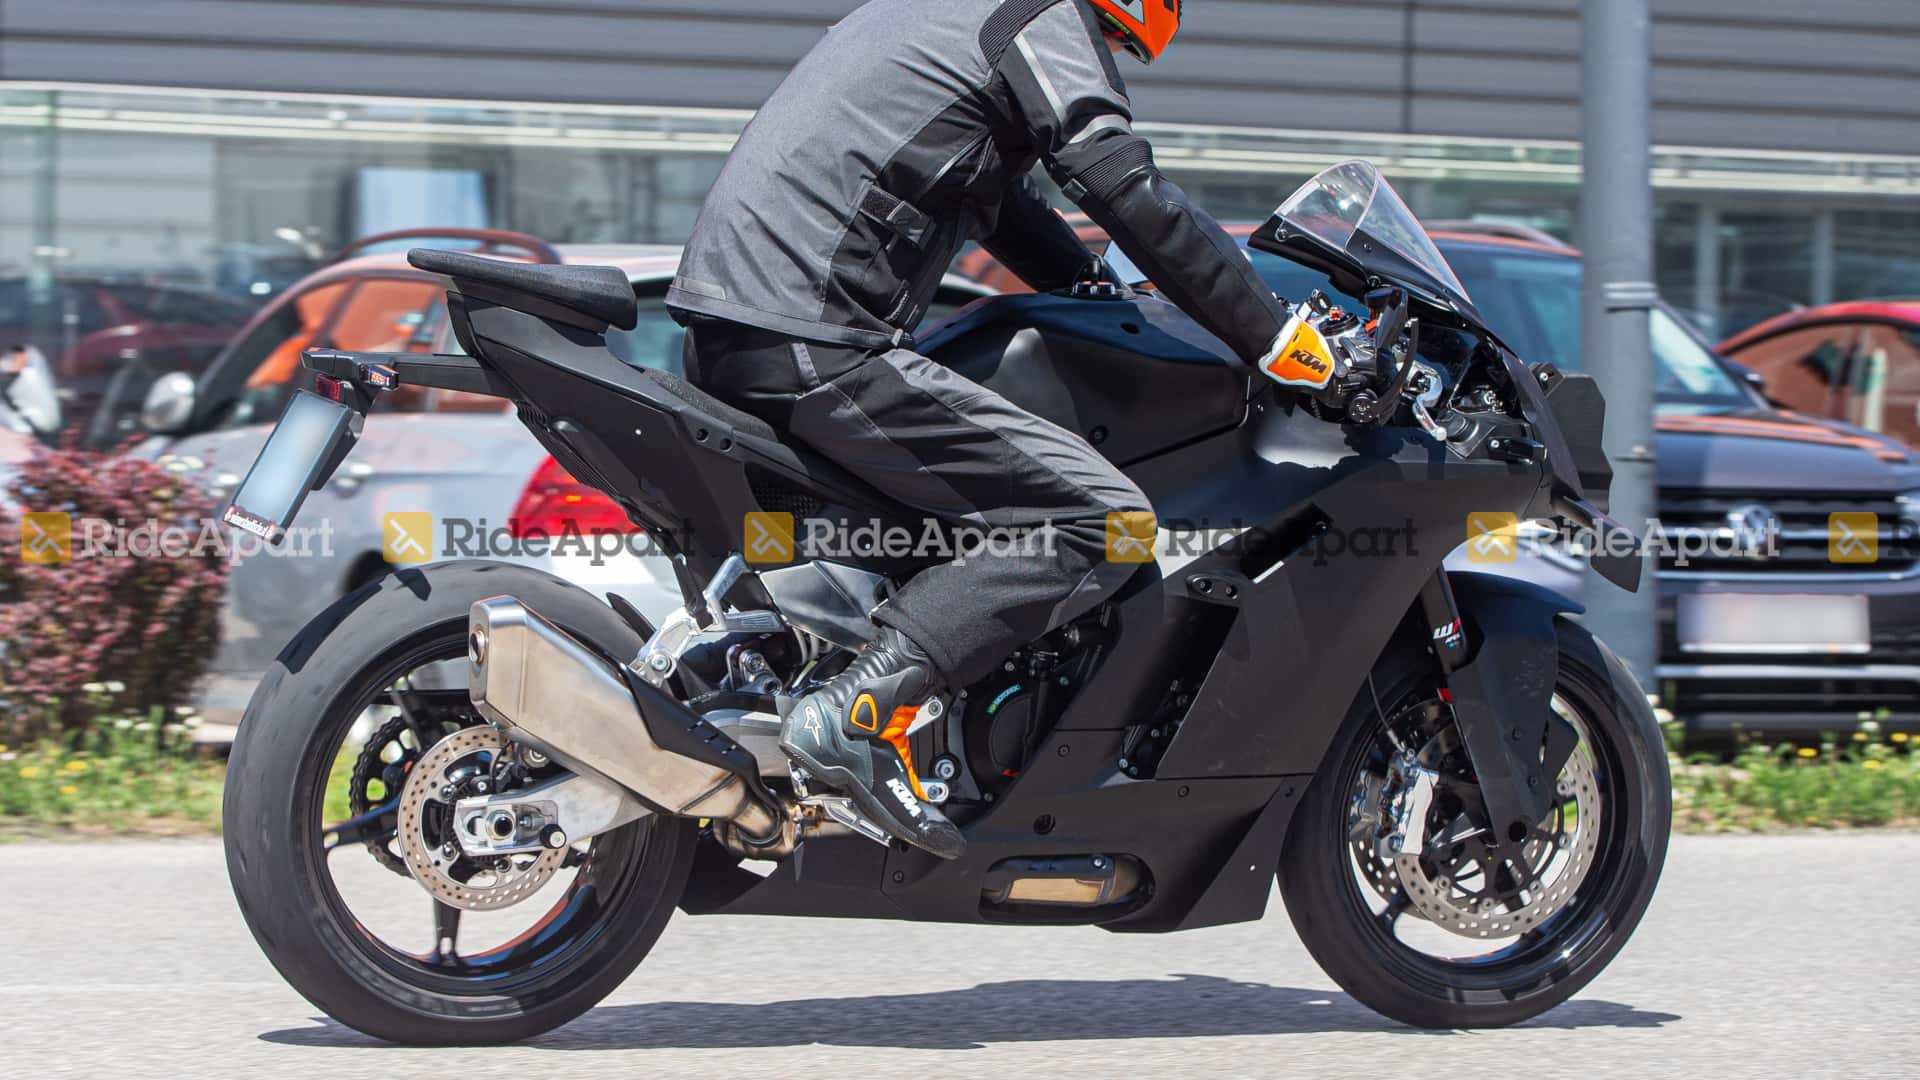 KTM RC 990 Sports Bike Spotted - The Faired Version of Duke 990 - view